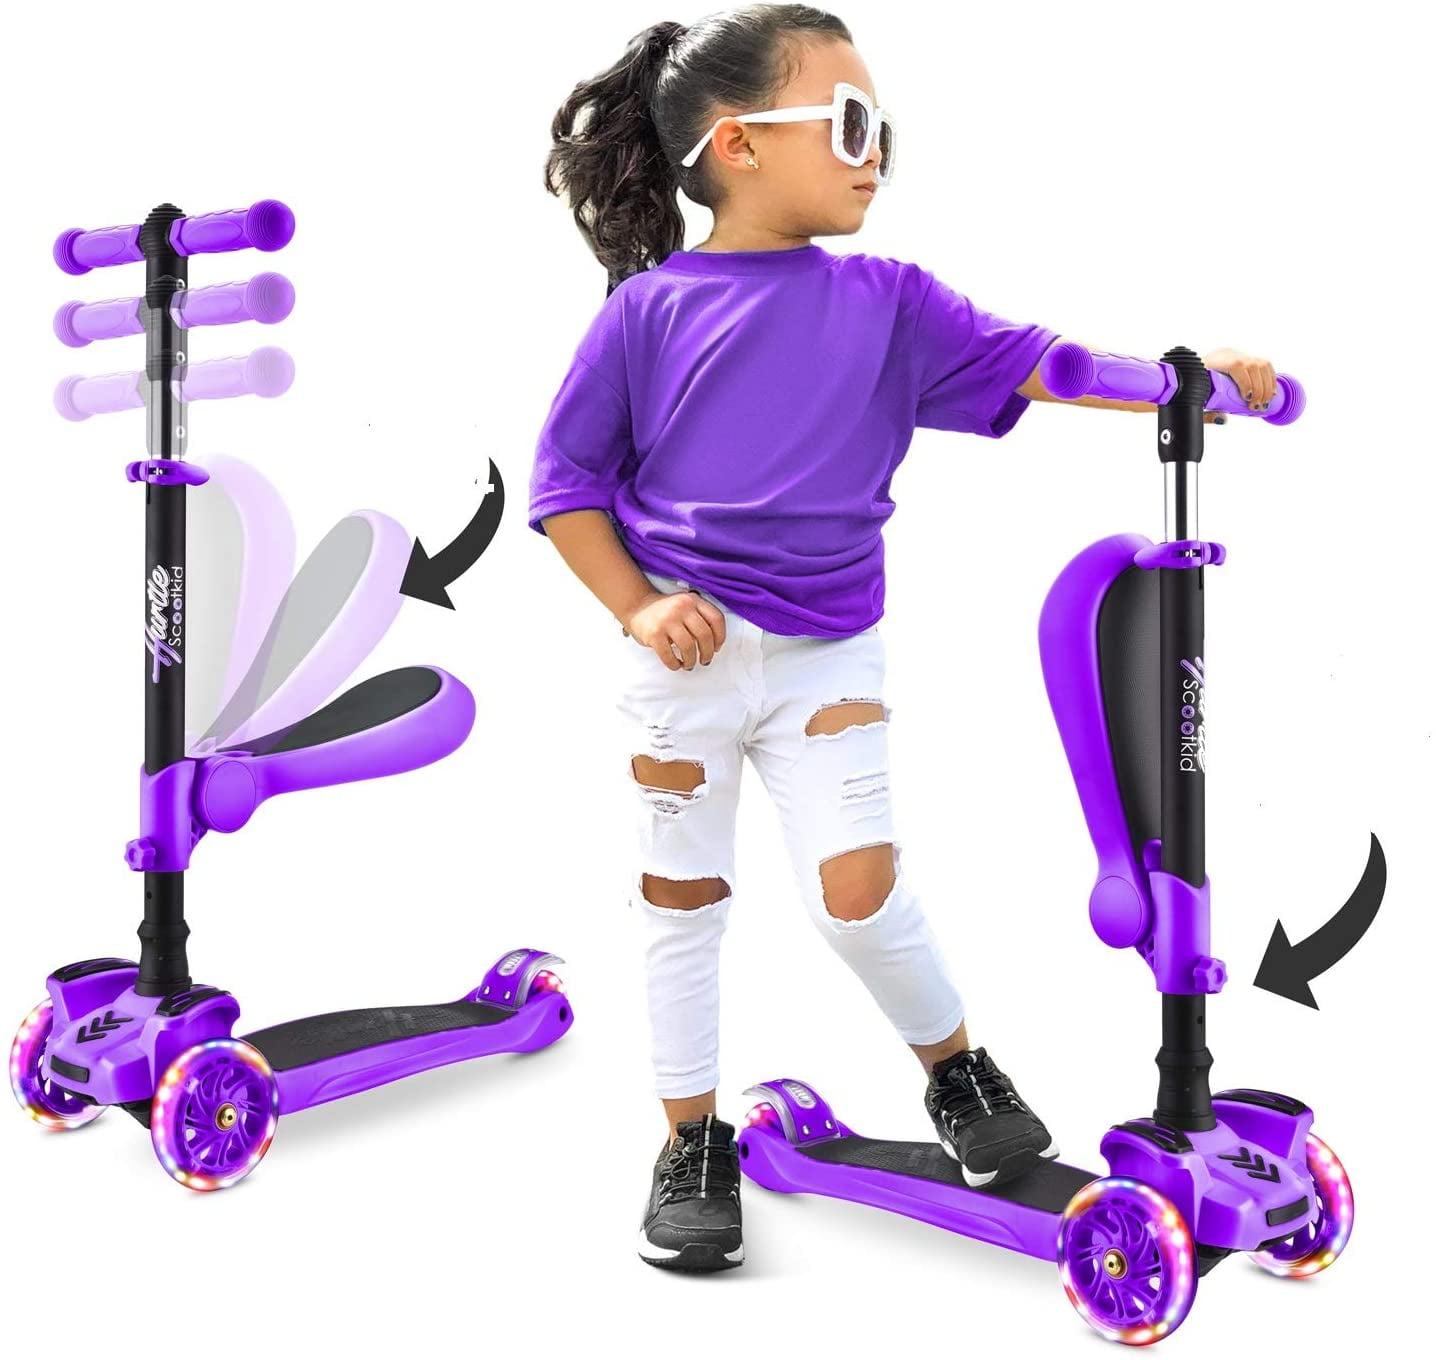 Details about  / Kids Scooter Deluxe for Toddler Adjustable Kick Scooters Girls Boys 2 LED Wheels